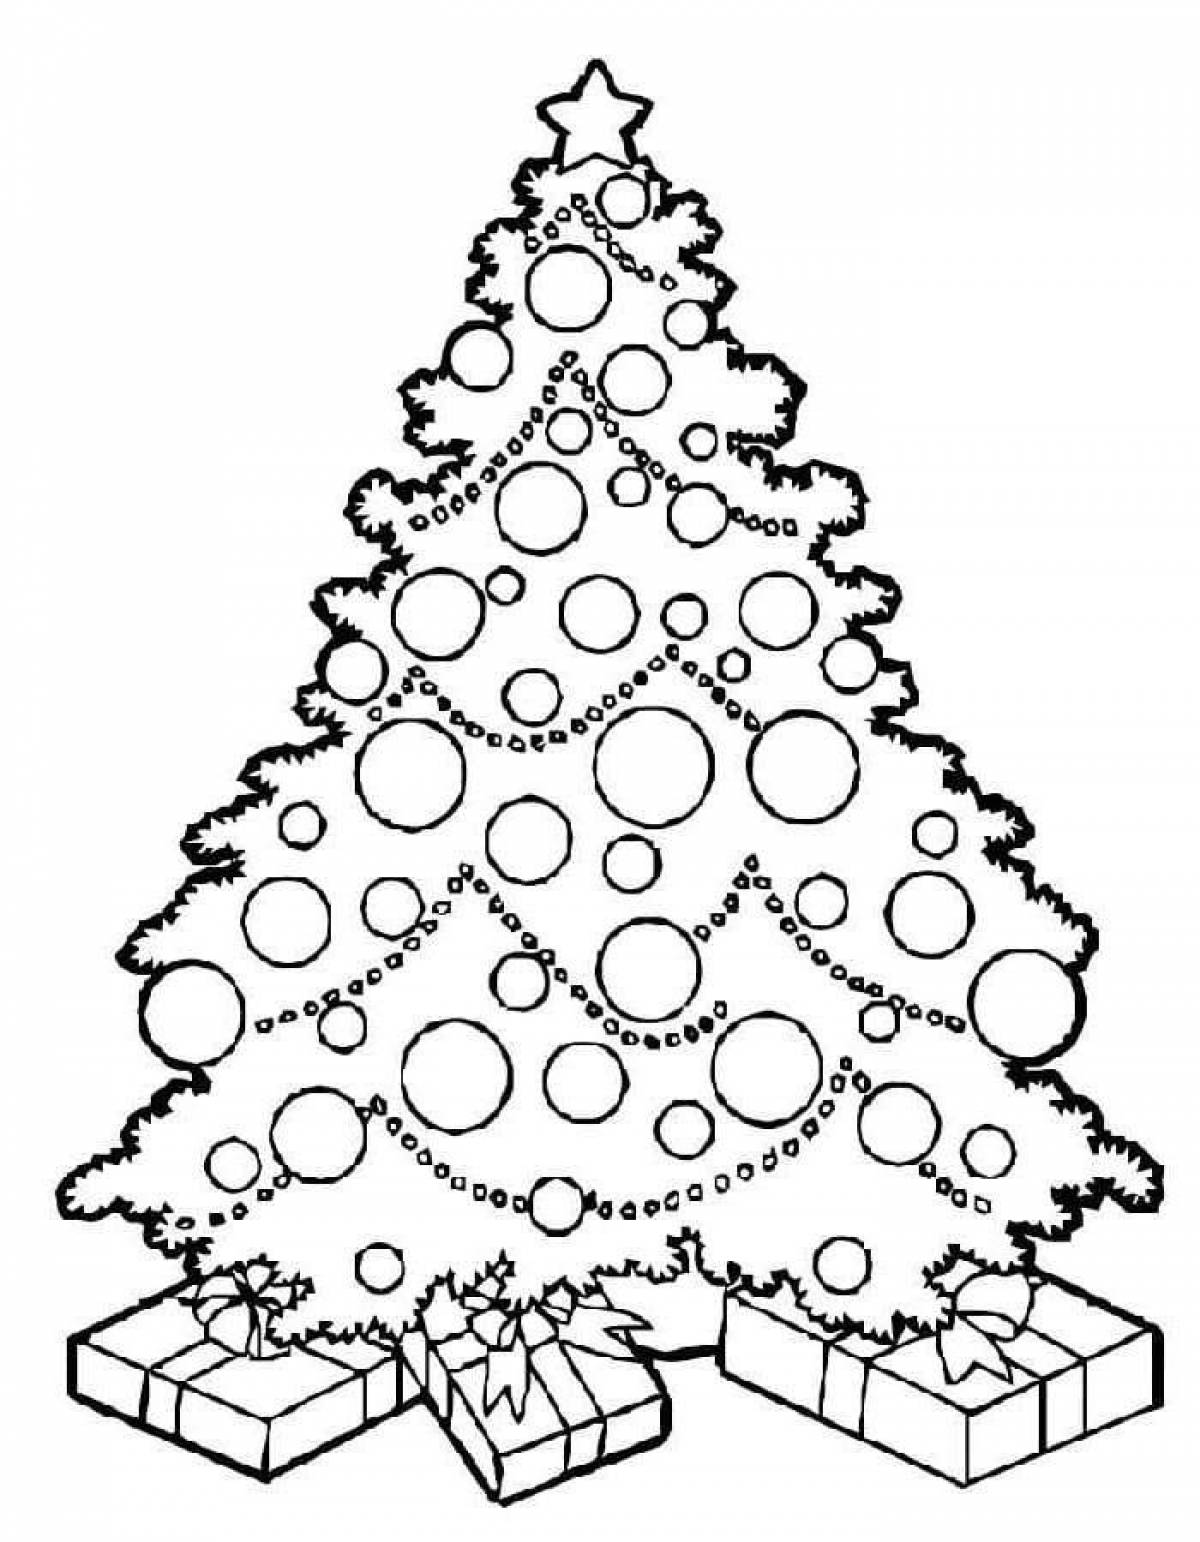 Glowing Christmas tree coloring book